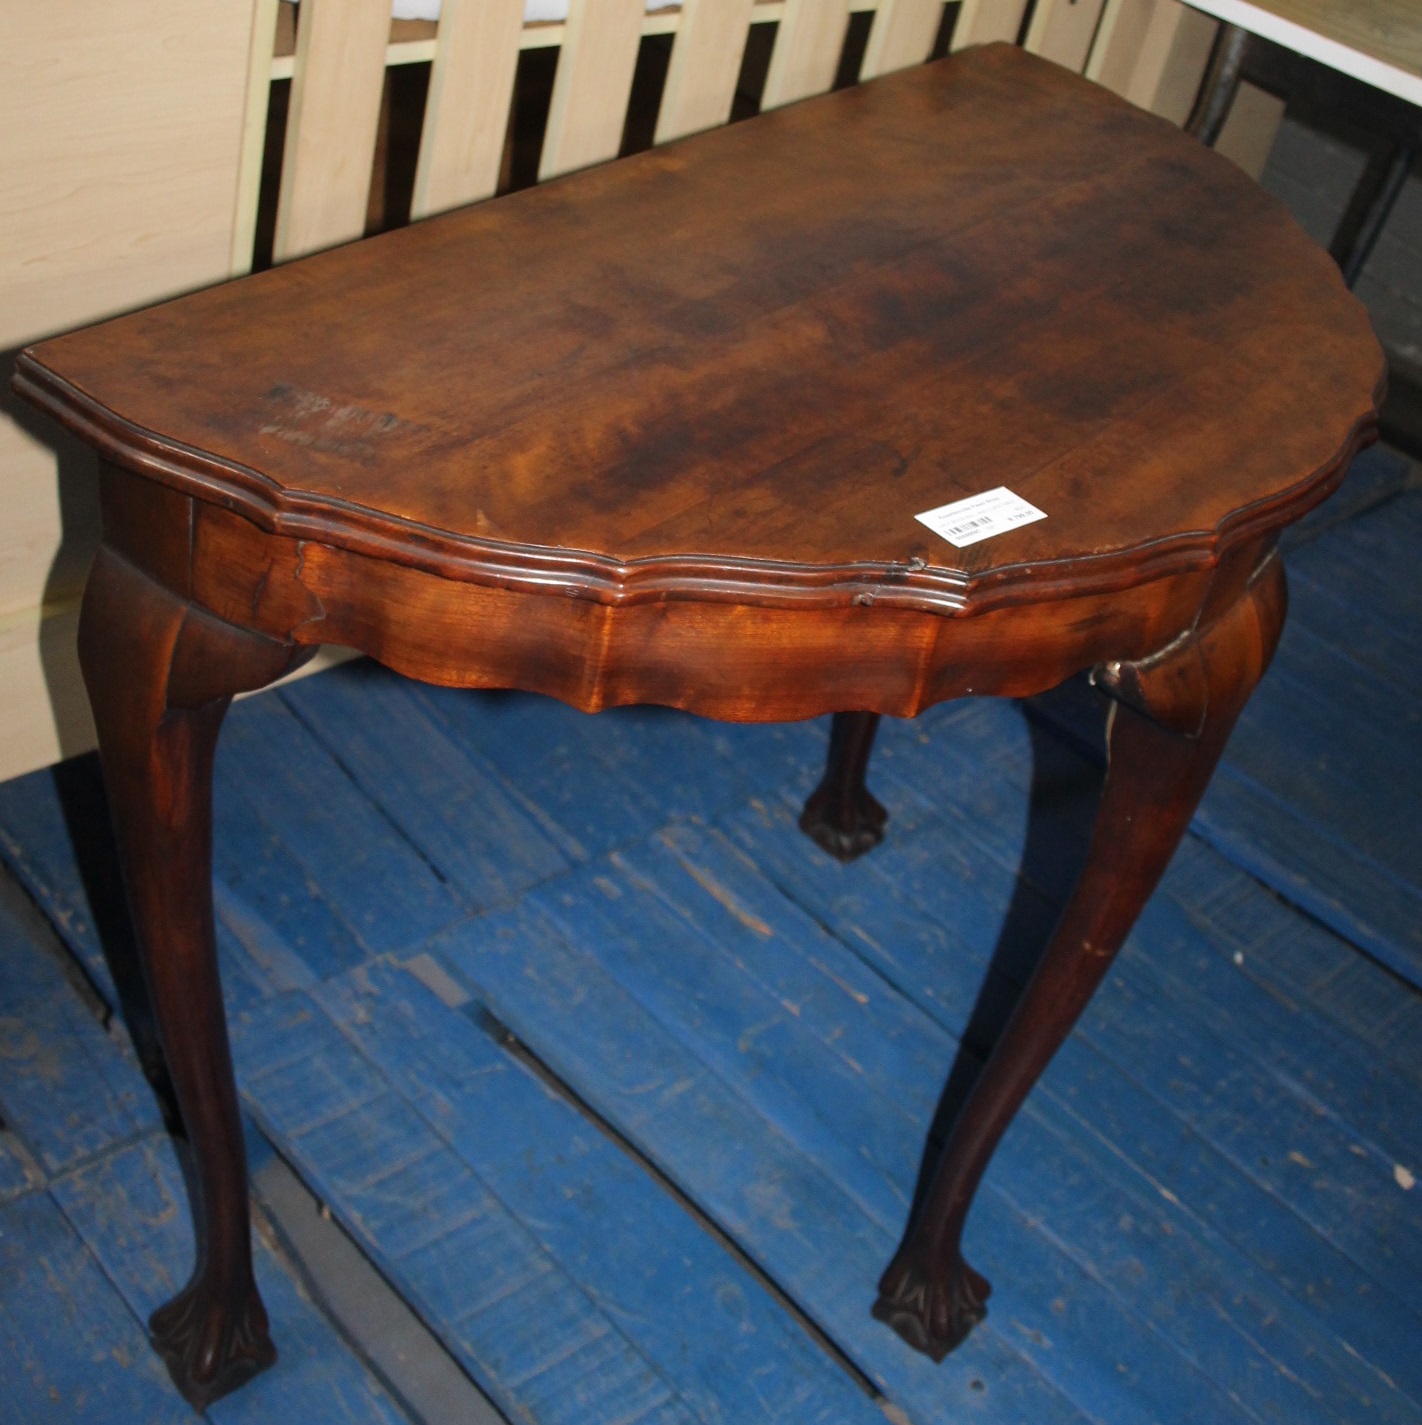 Half moon ball and claw table S046559C #Rosettenvillepawnshop